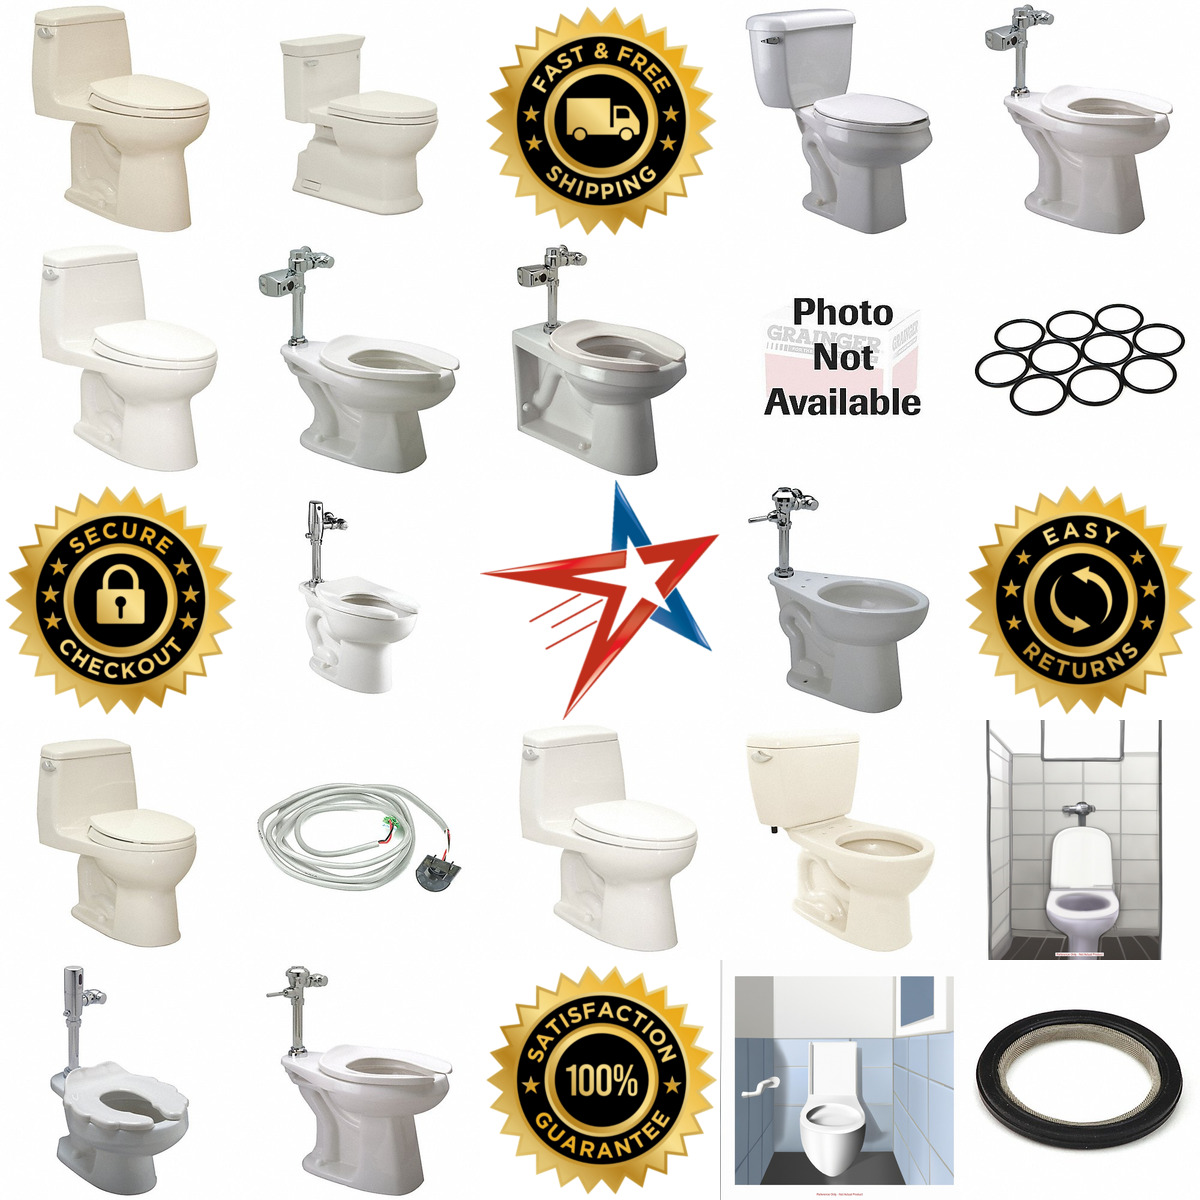 A selection of Toilets products on GoVets